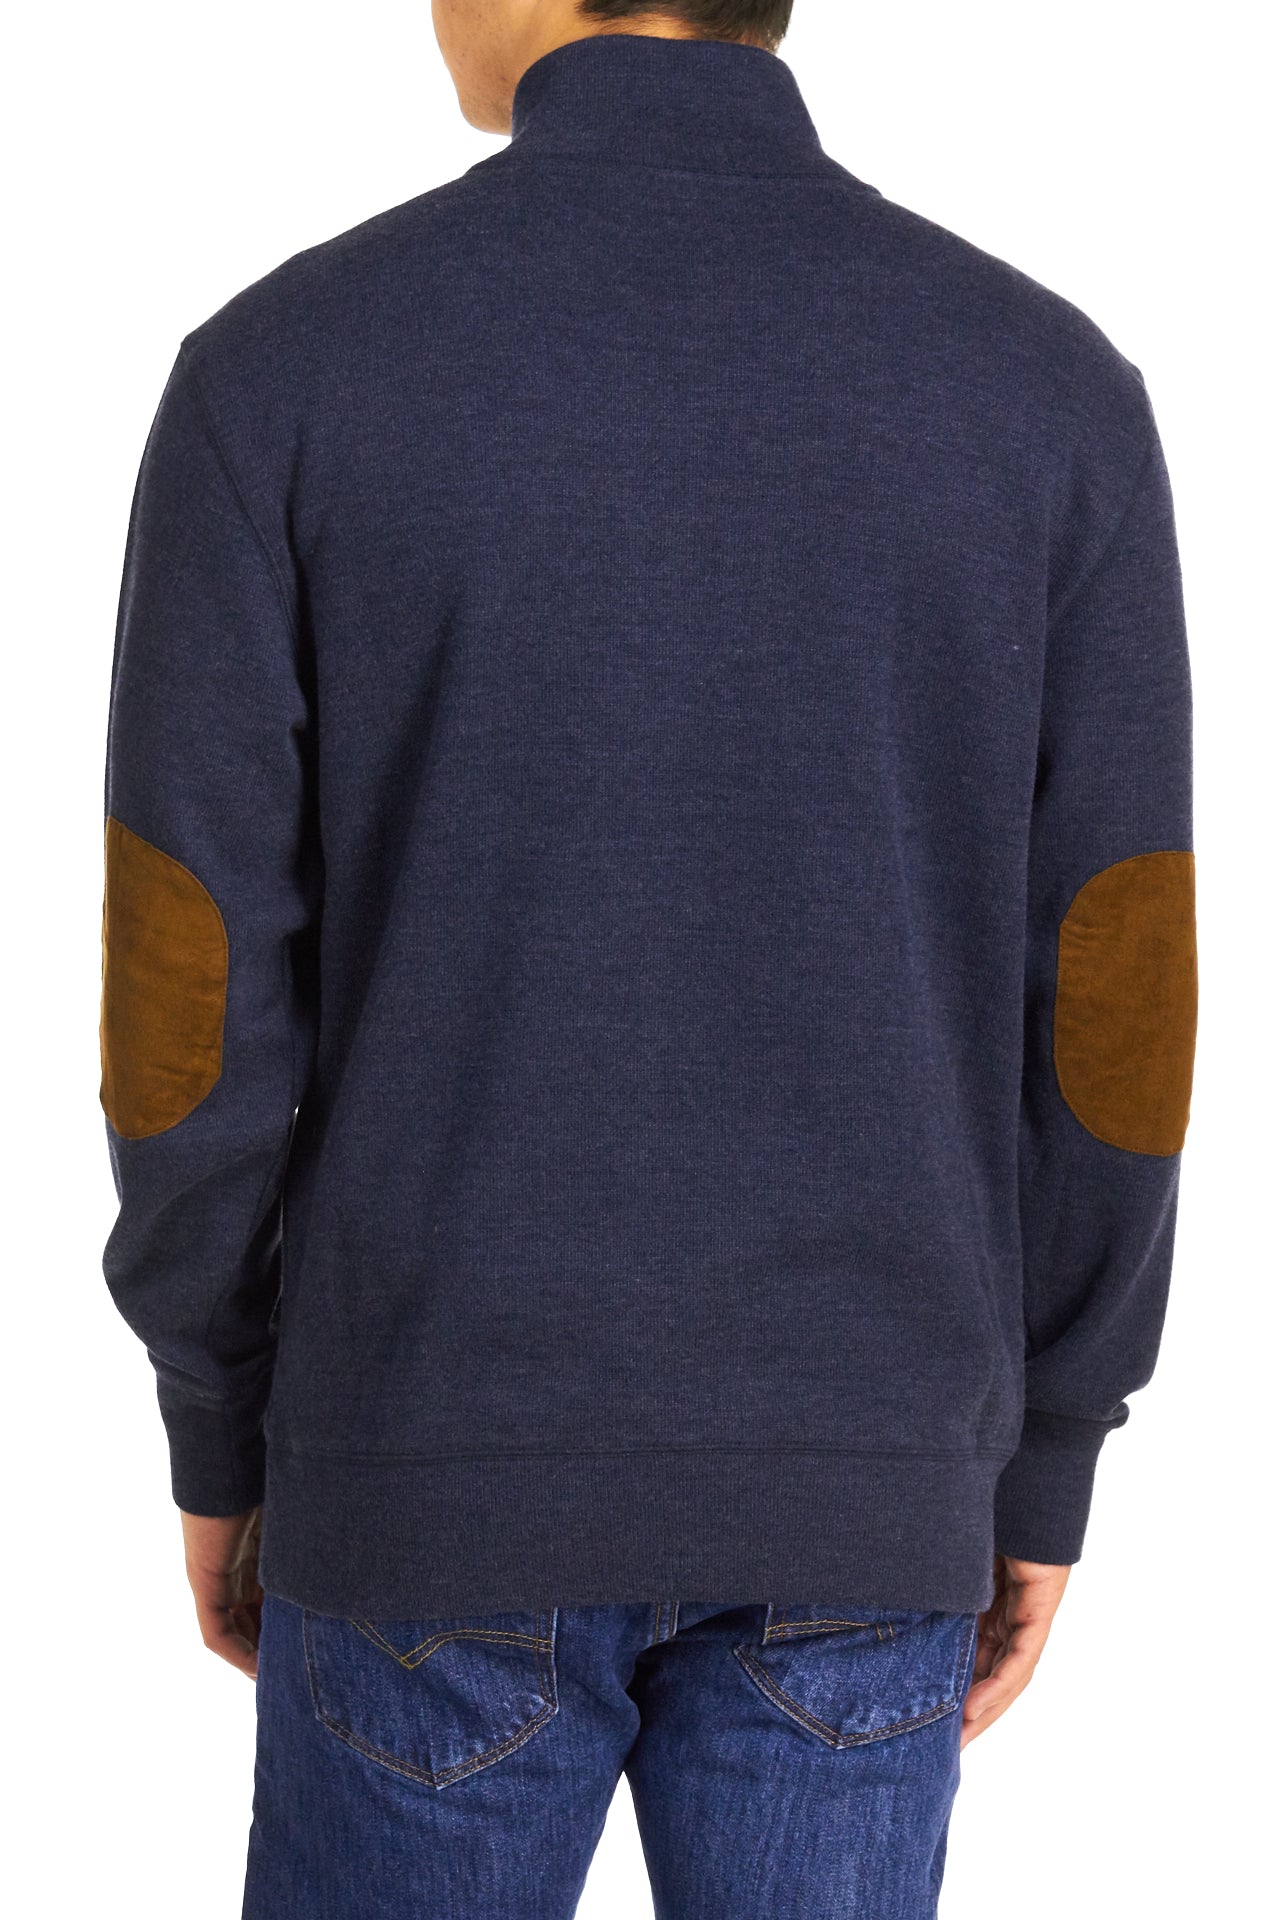 Quarter Zip Knit With Microsuede Patches Shirt